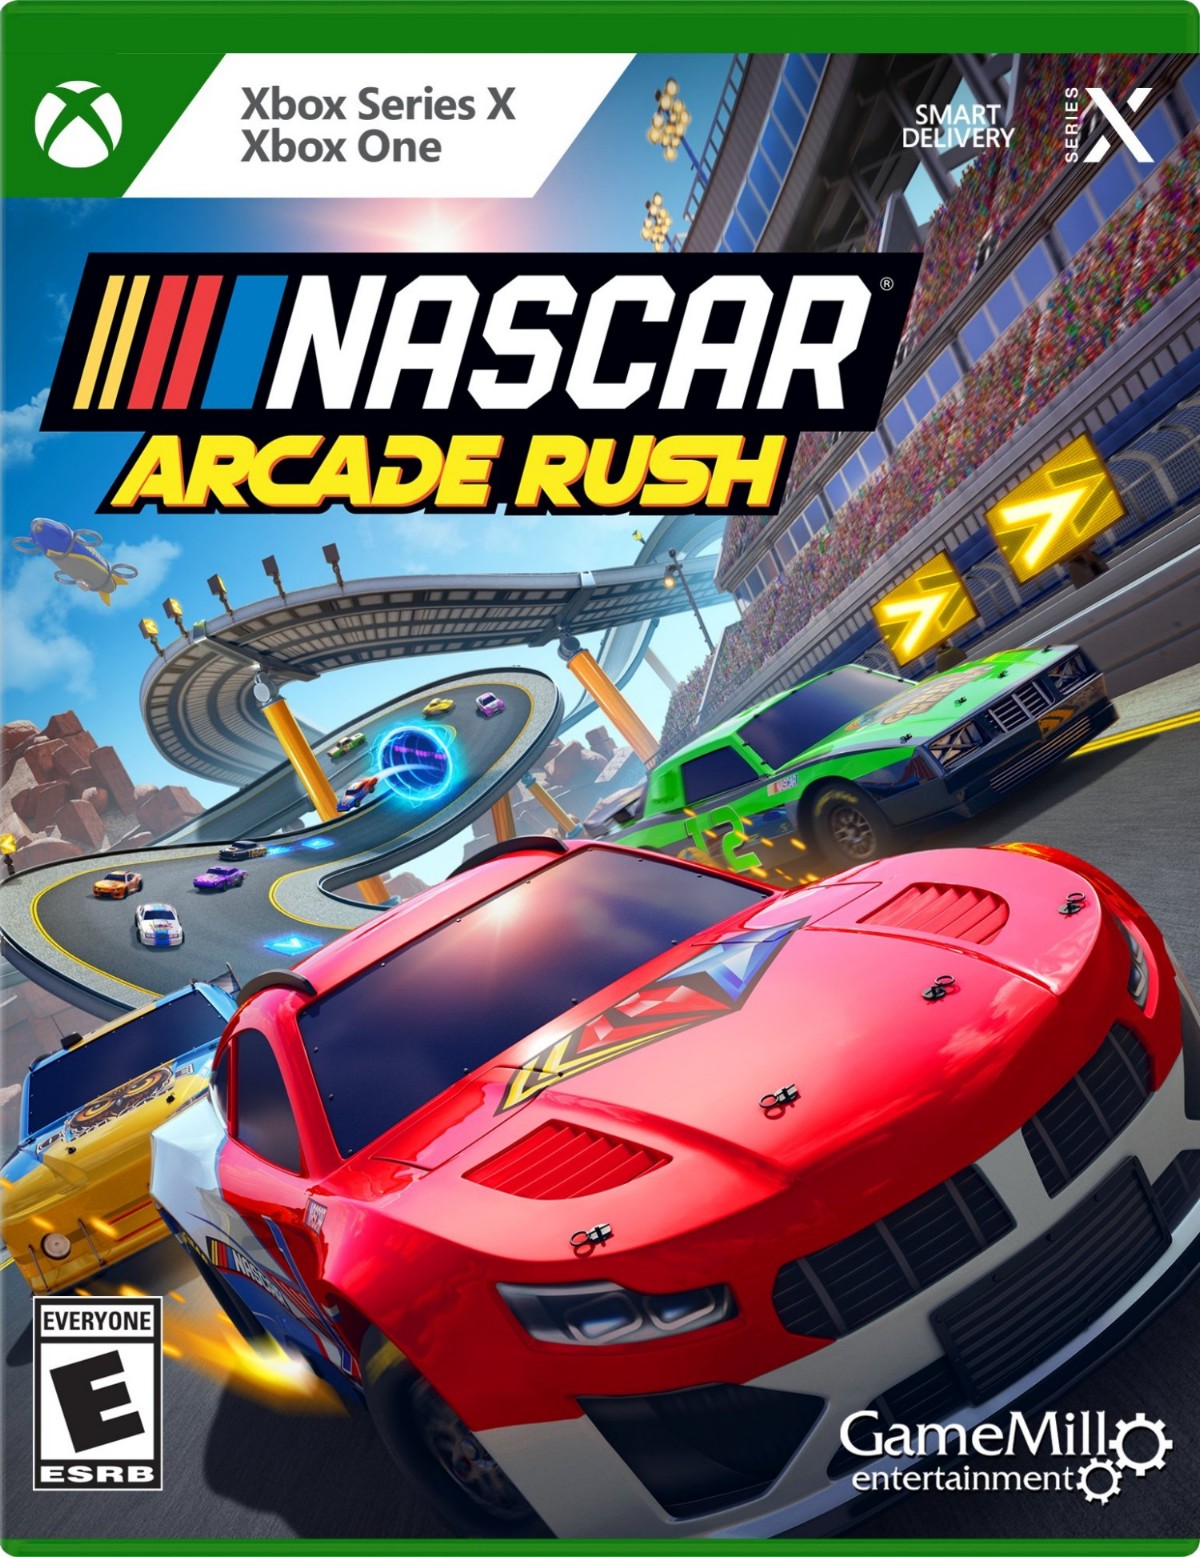 NASCAR Arcade Rush, Launching on Consoles and PC